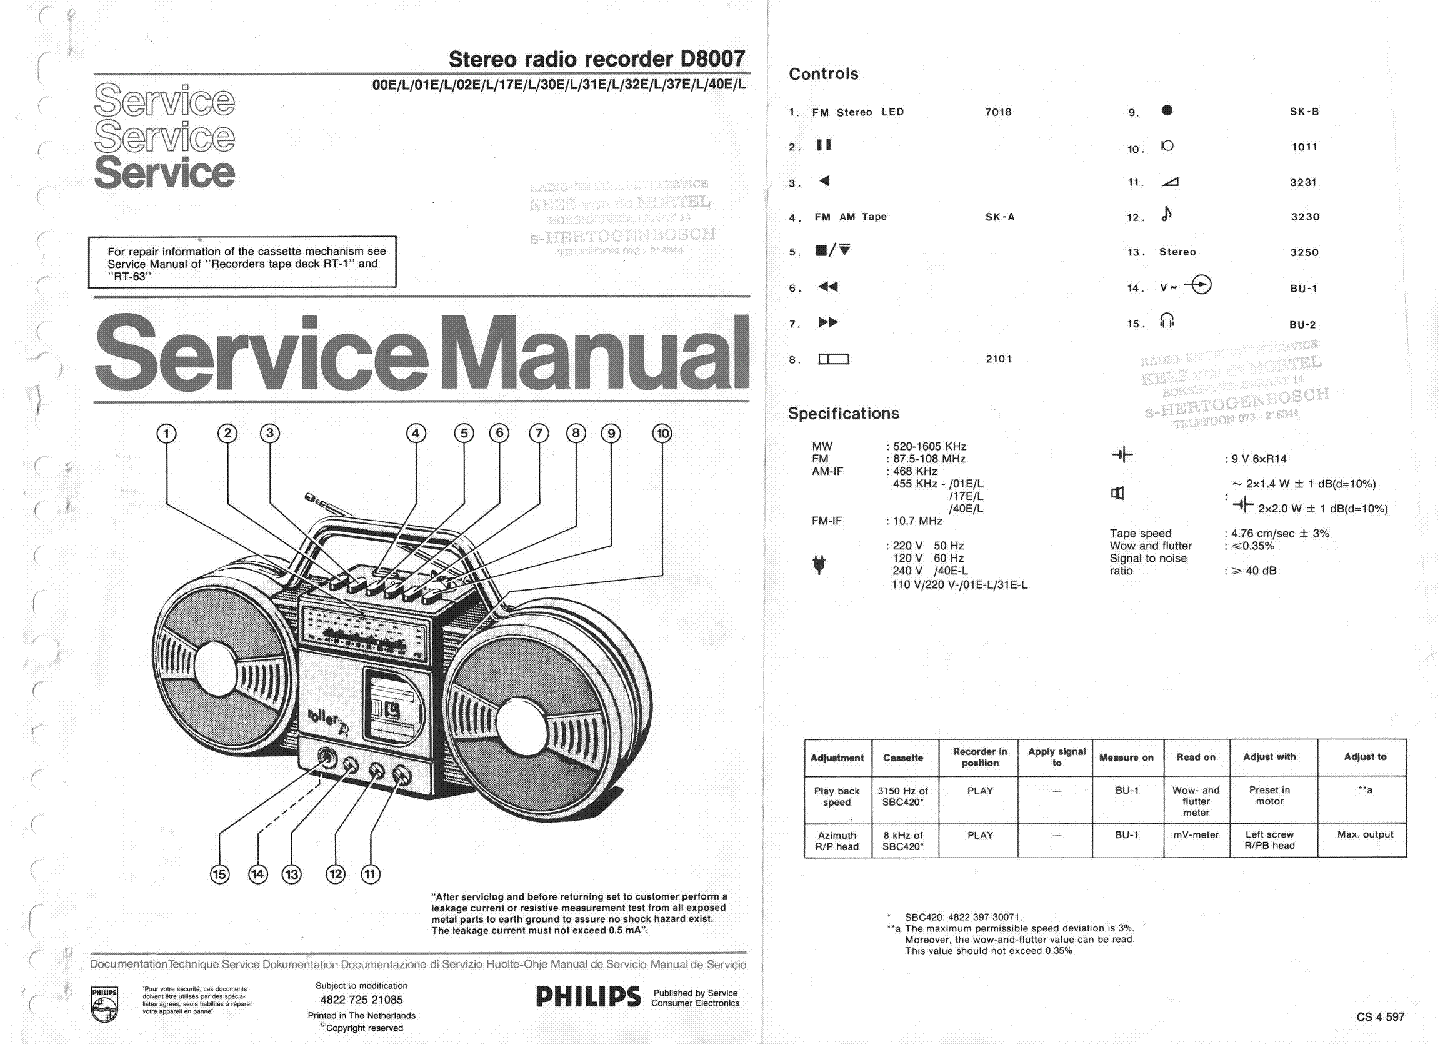 PHILIPS D8007 SM service manual (1st page)